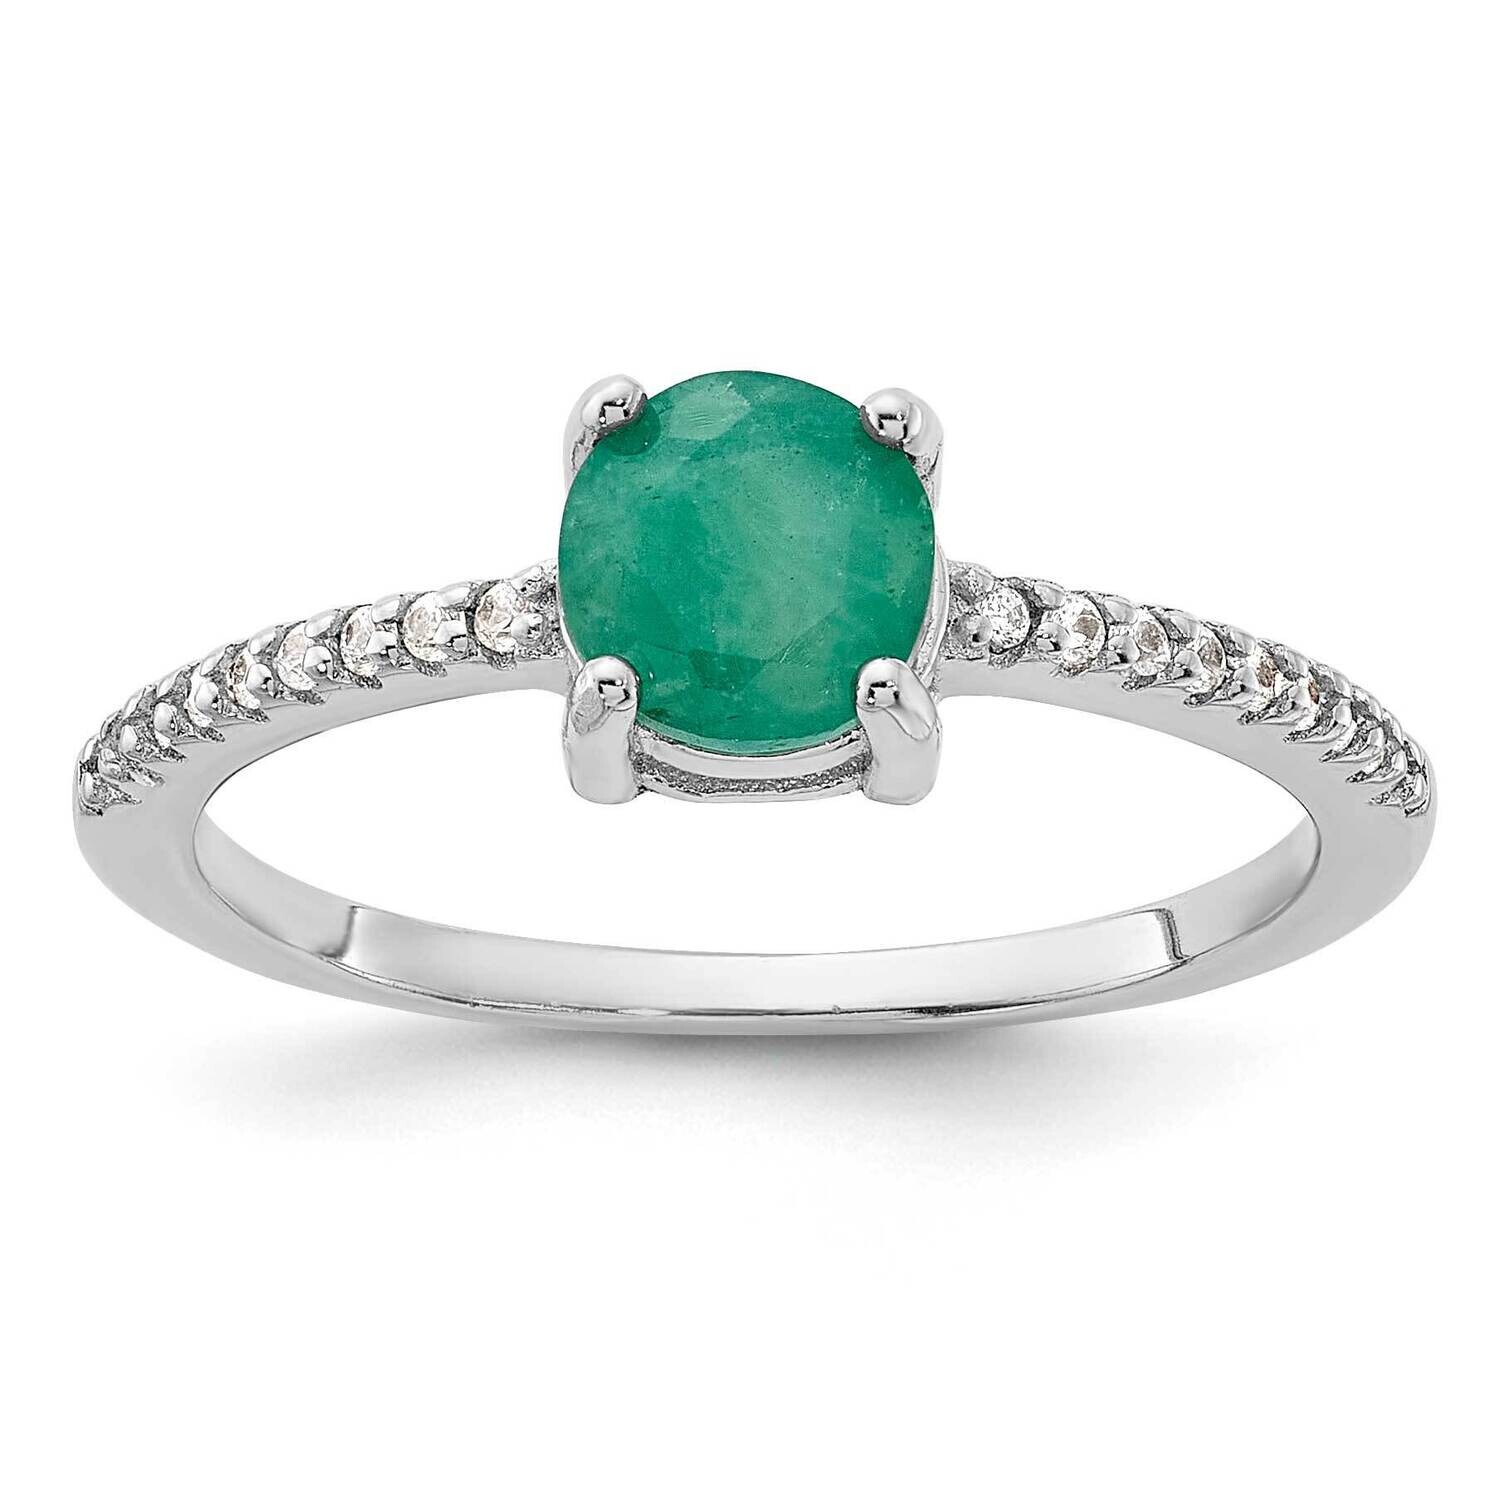 Rh-Plated-Plated 1.0Em Emerald .12Wt White Topaz Ring Sterling Silver QR7443E